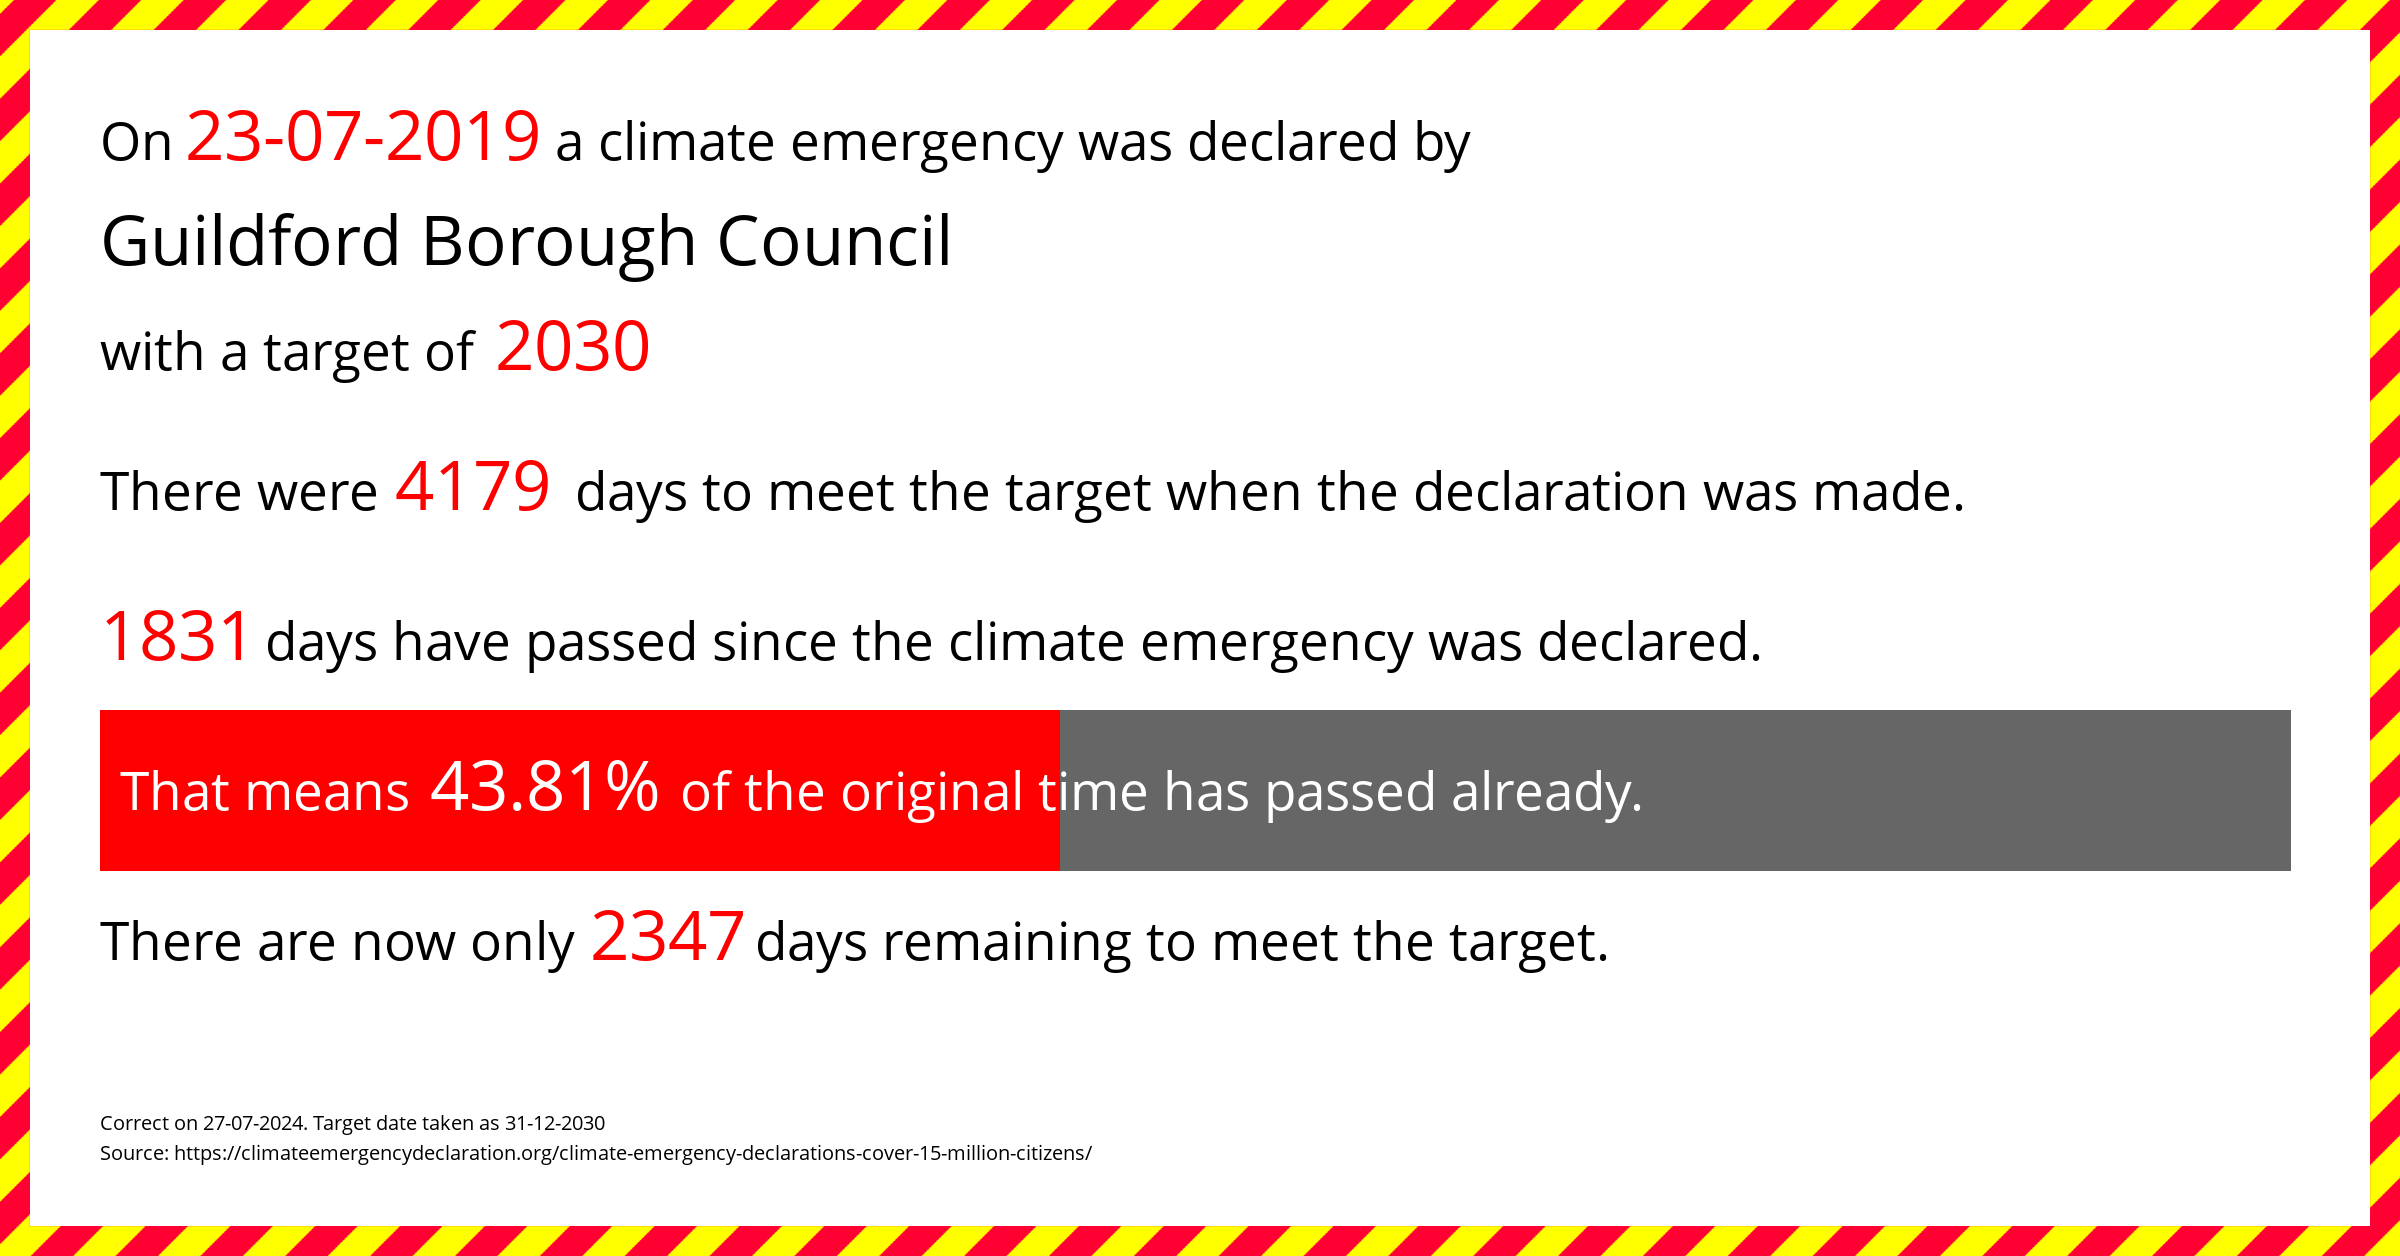 Guildford Borough Council declared a Climate emergency on Tuesday 23rd July 2019, with a target of 2030.